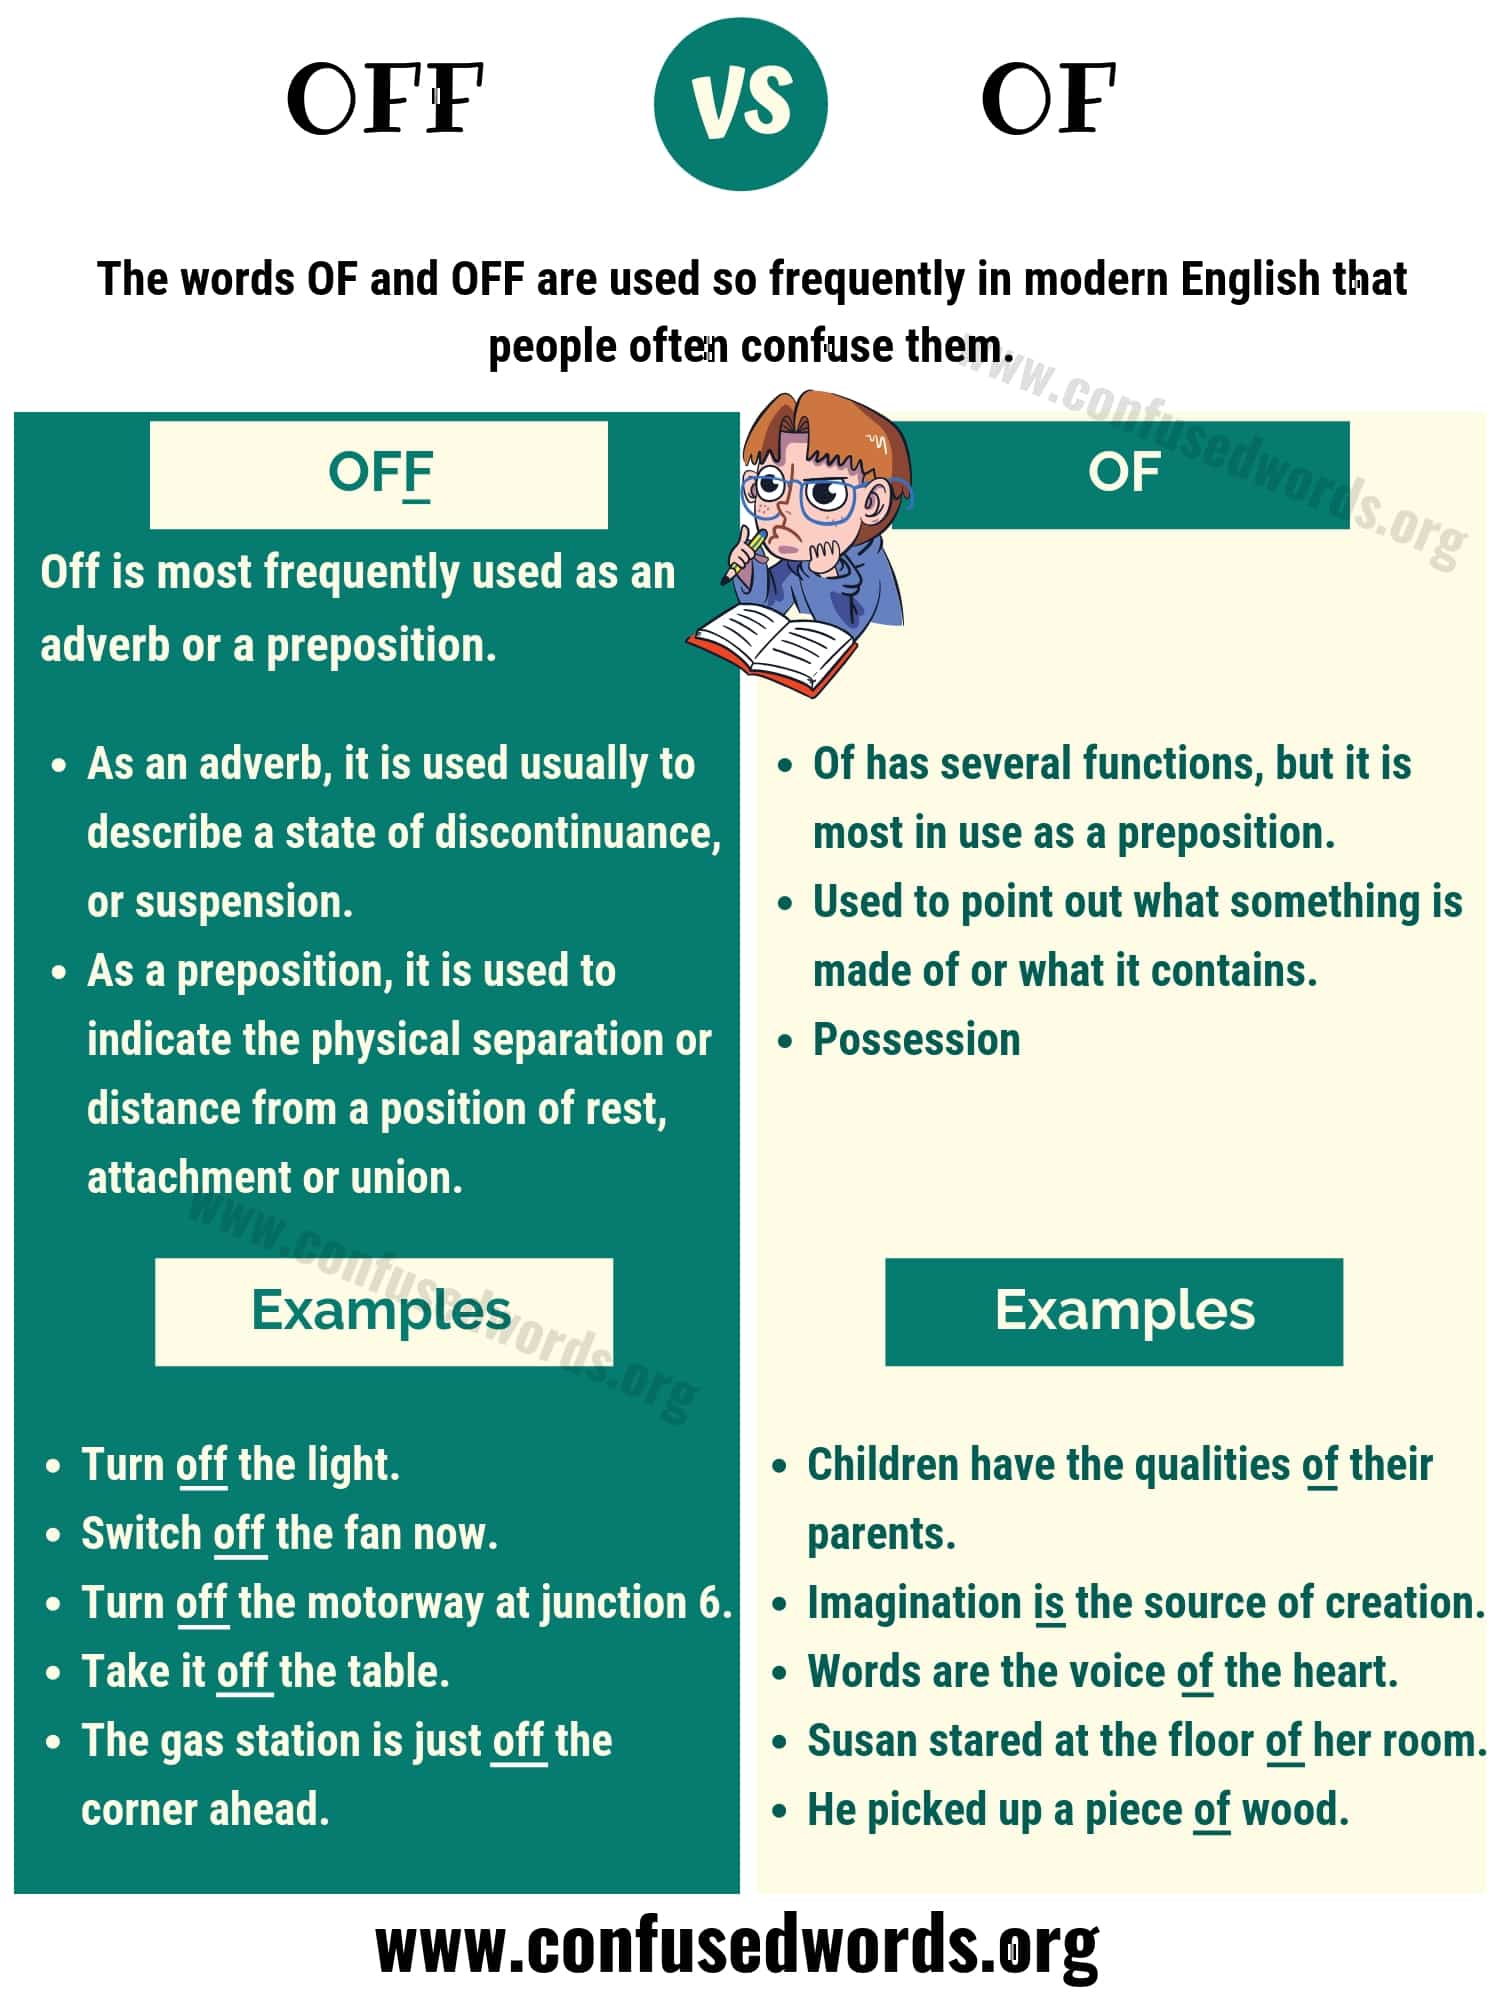 OFF OF - What's the difference between Of vs Off?